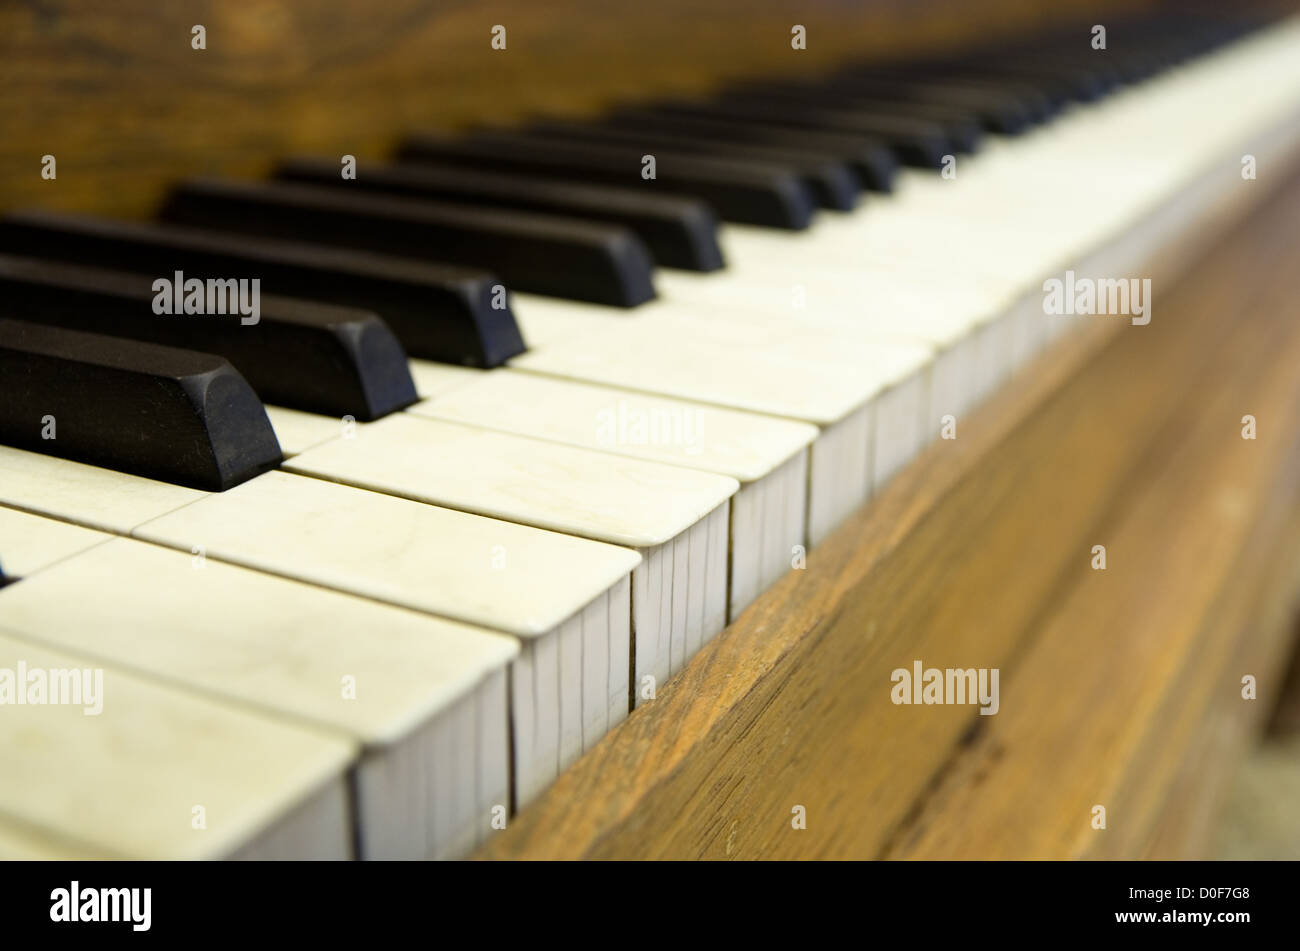 close up perspective image of old piano keys with shallow depth of field Stock Photo